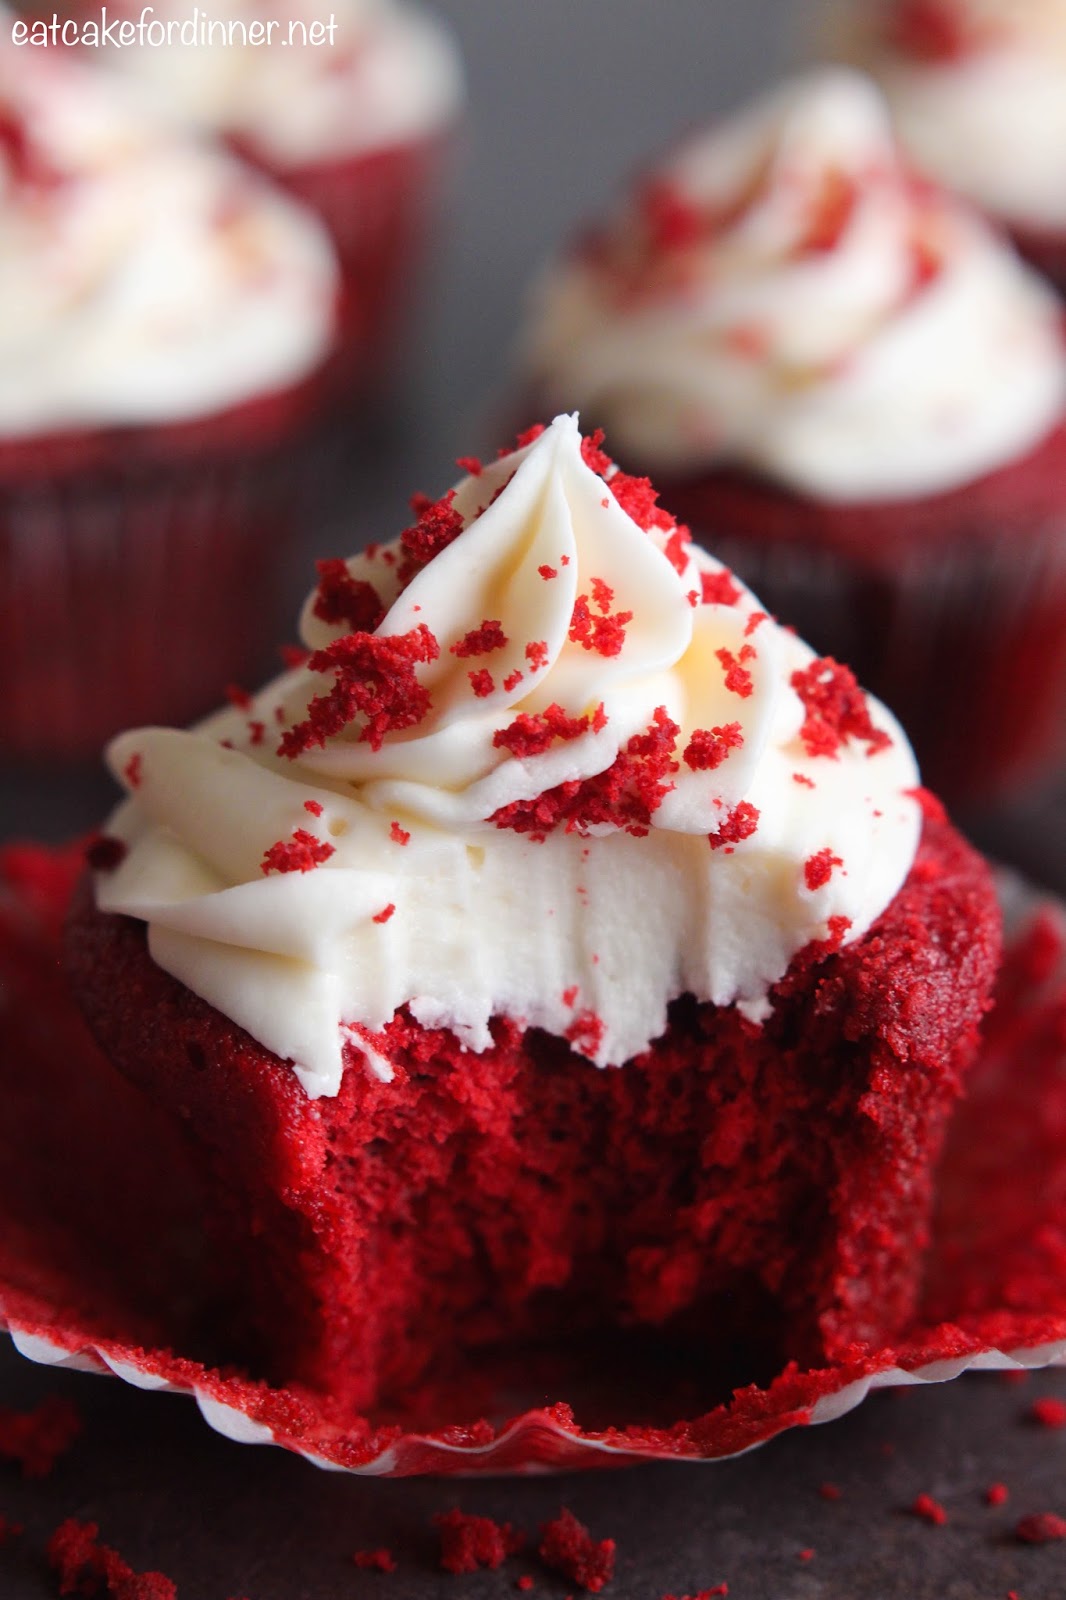 Eat Cake For Dinner: The BEST Red Velvet Cupcakes with Cream Cheese ...